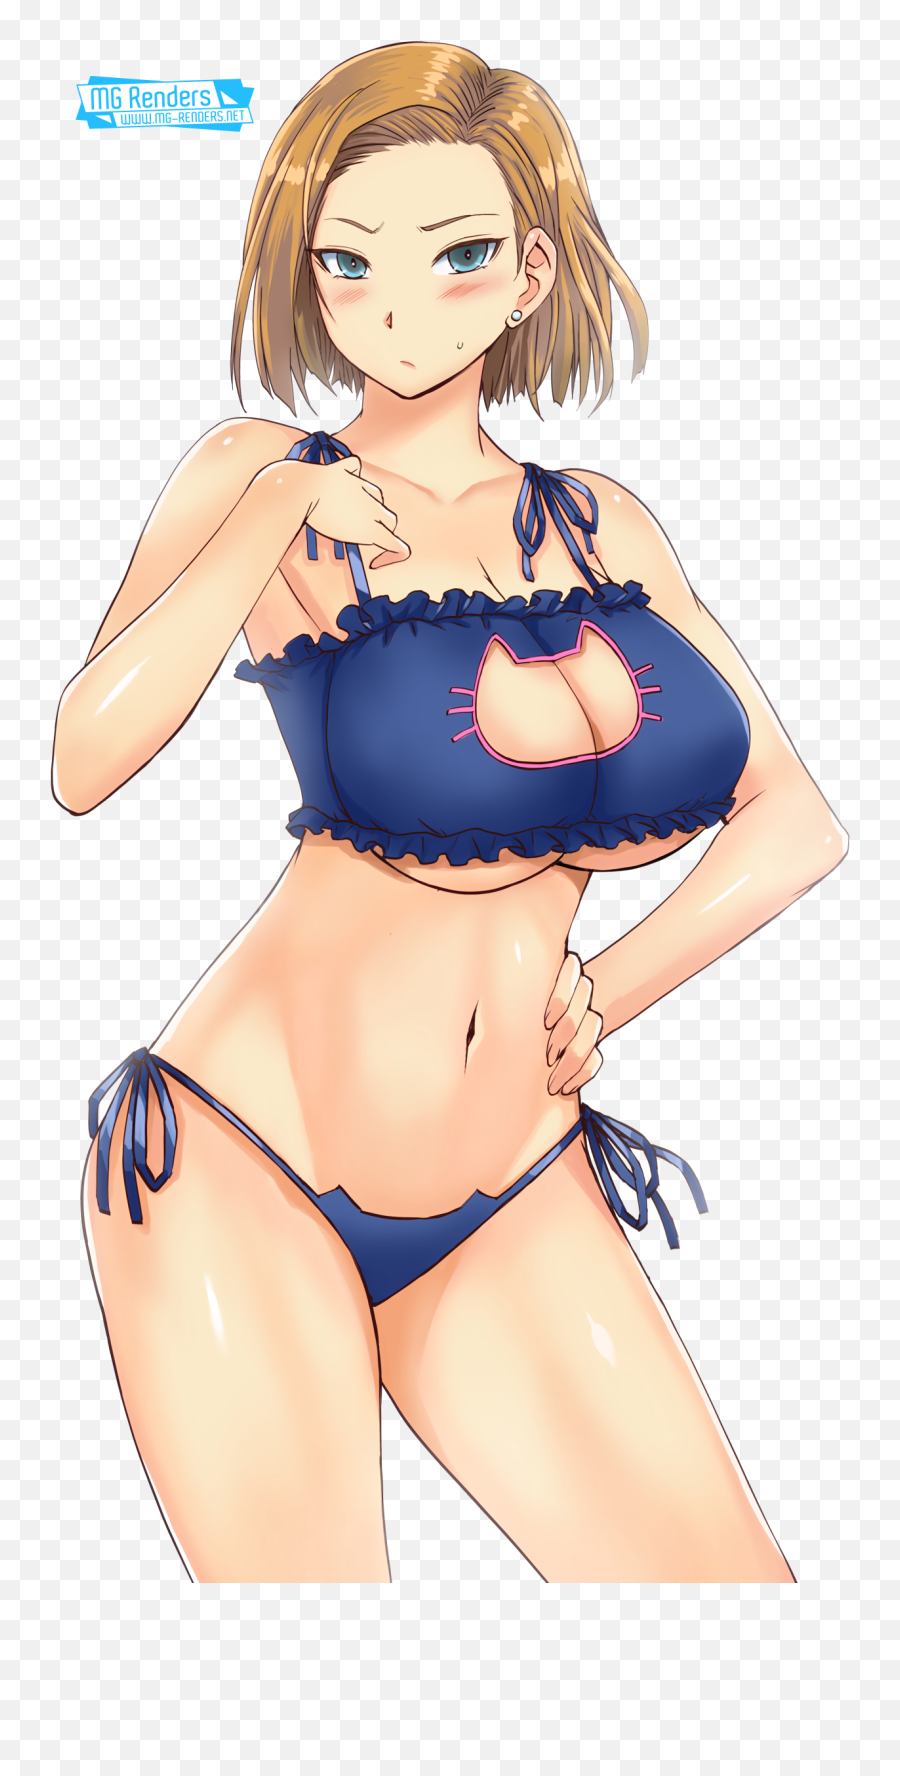 Dragon Ball - Android 18 Render 2 Anime Png Image Android 18 Sexy Bikini,Android 18 Png